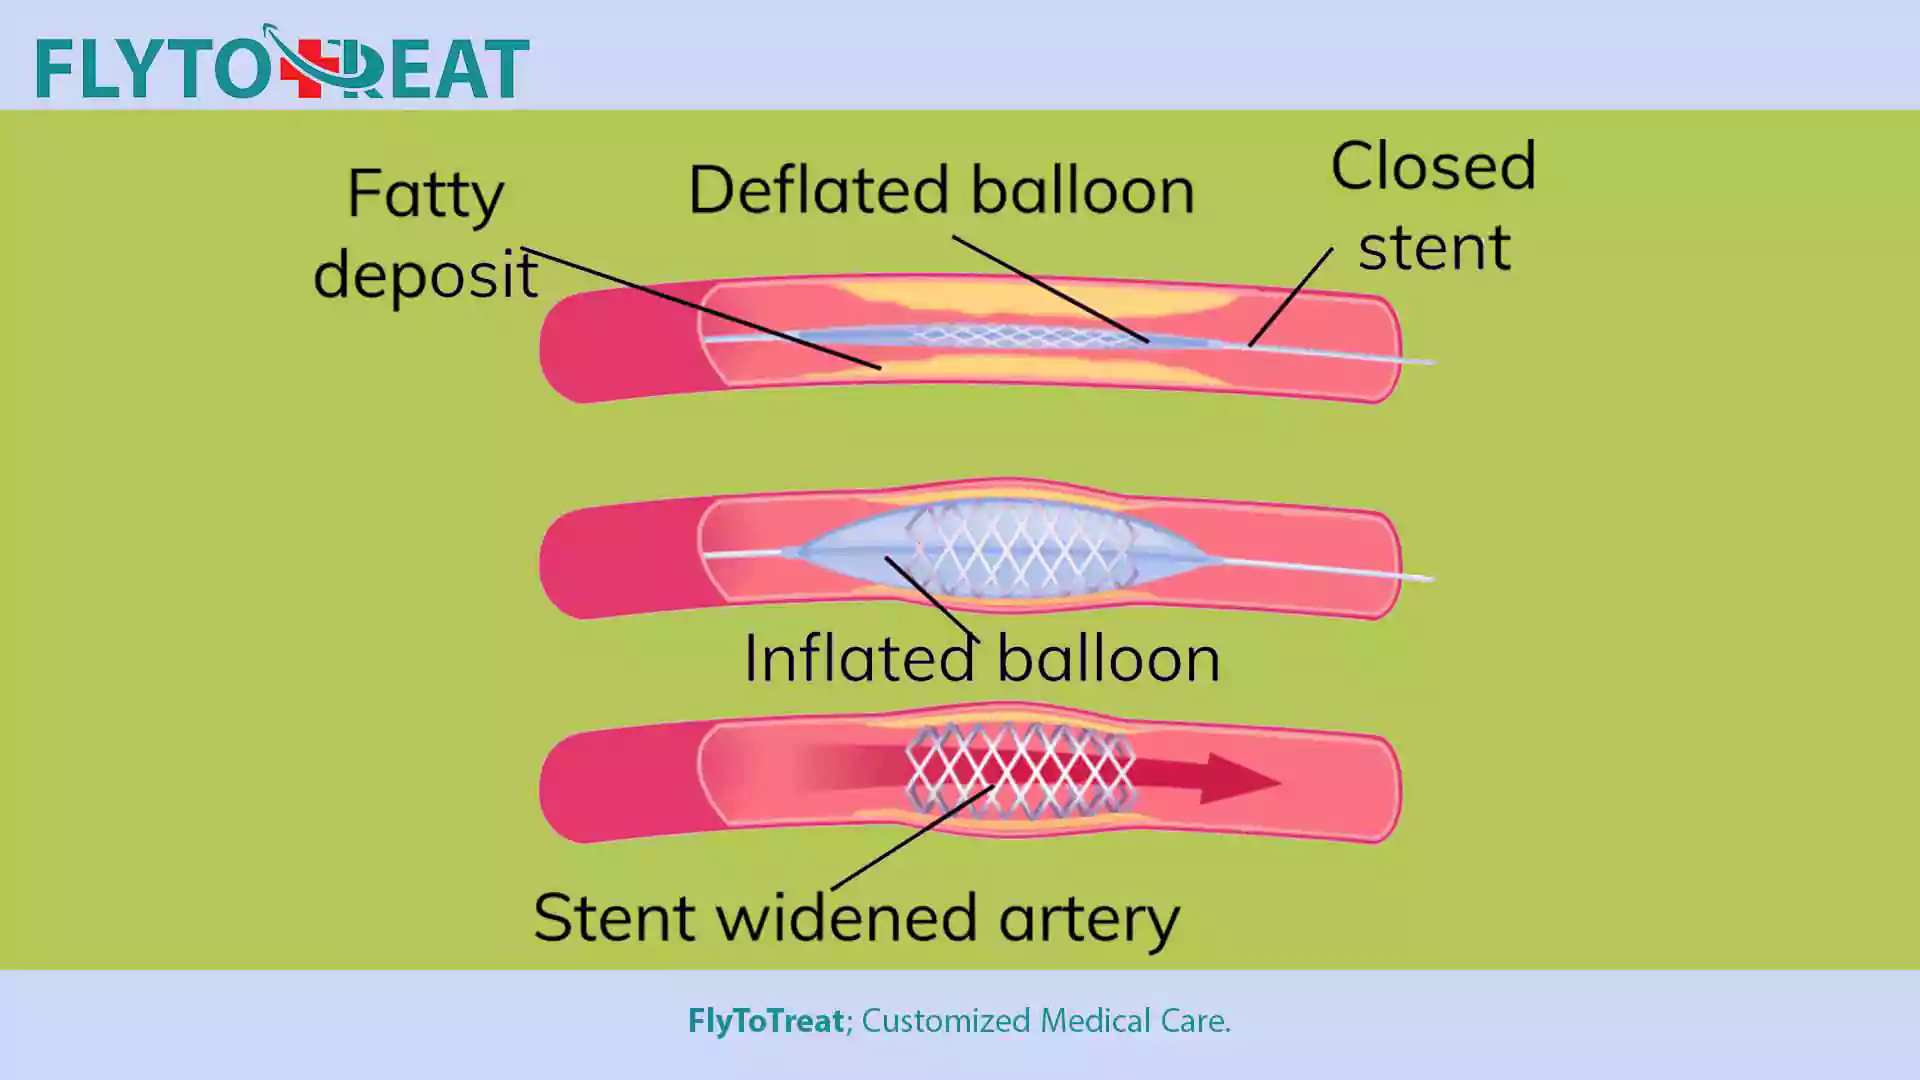 How Does an Angioplasty Procedure Work?